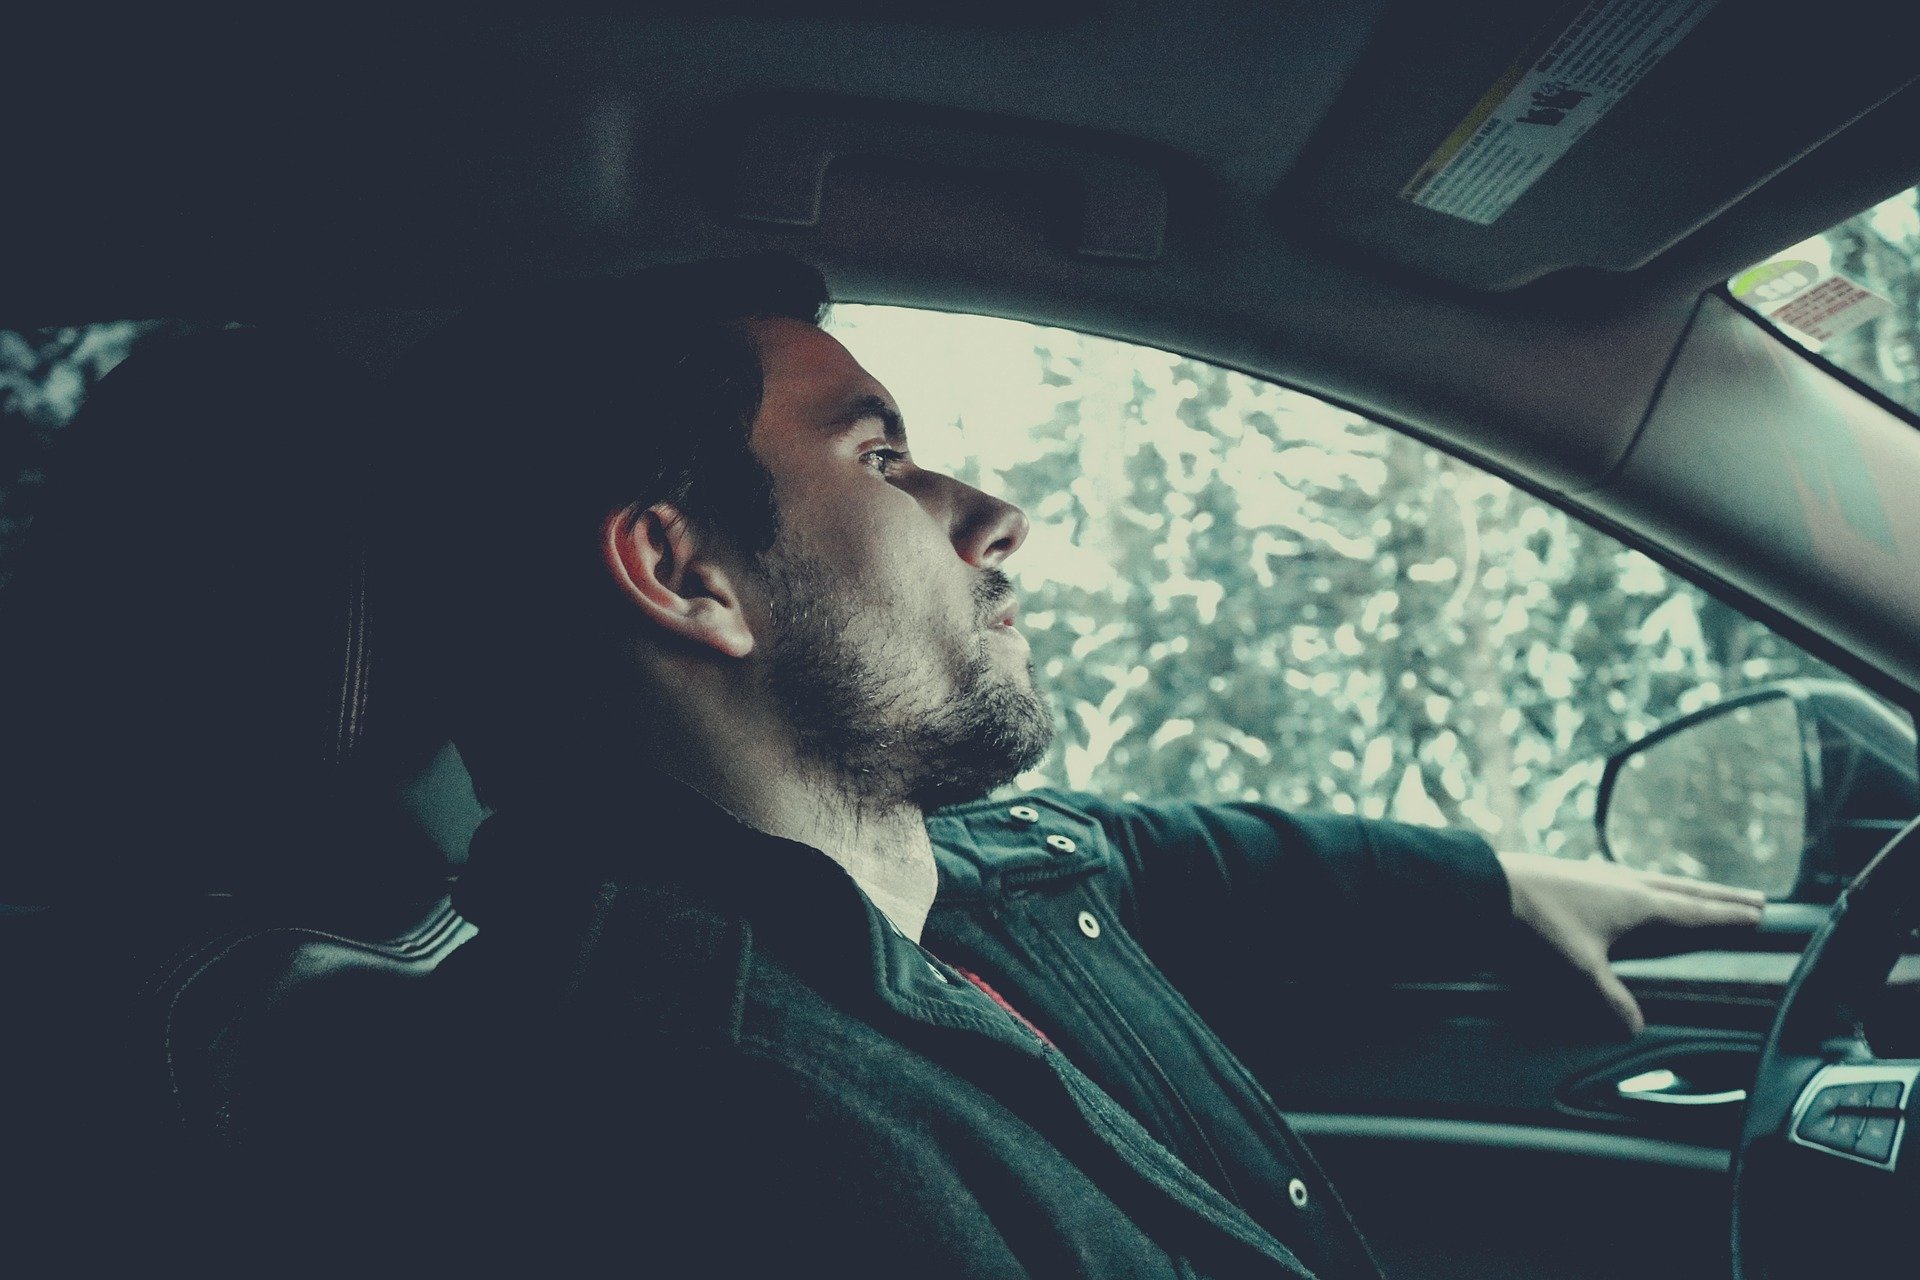 Pictured - A young man in deep thoughts while inside a car | Source: Pixabay